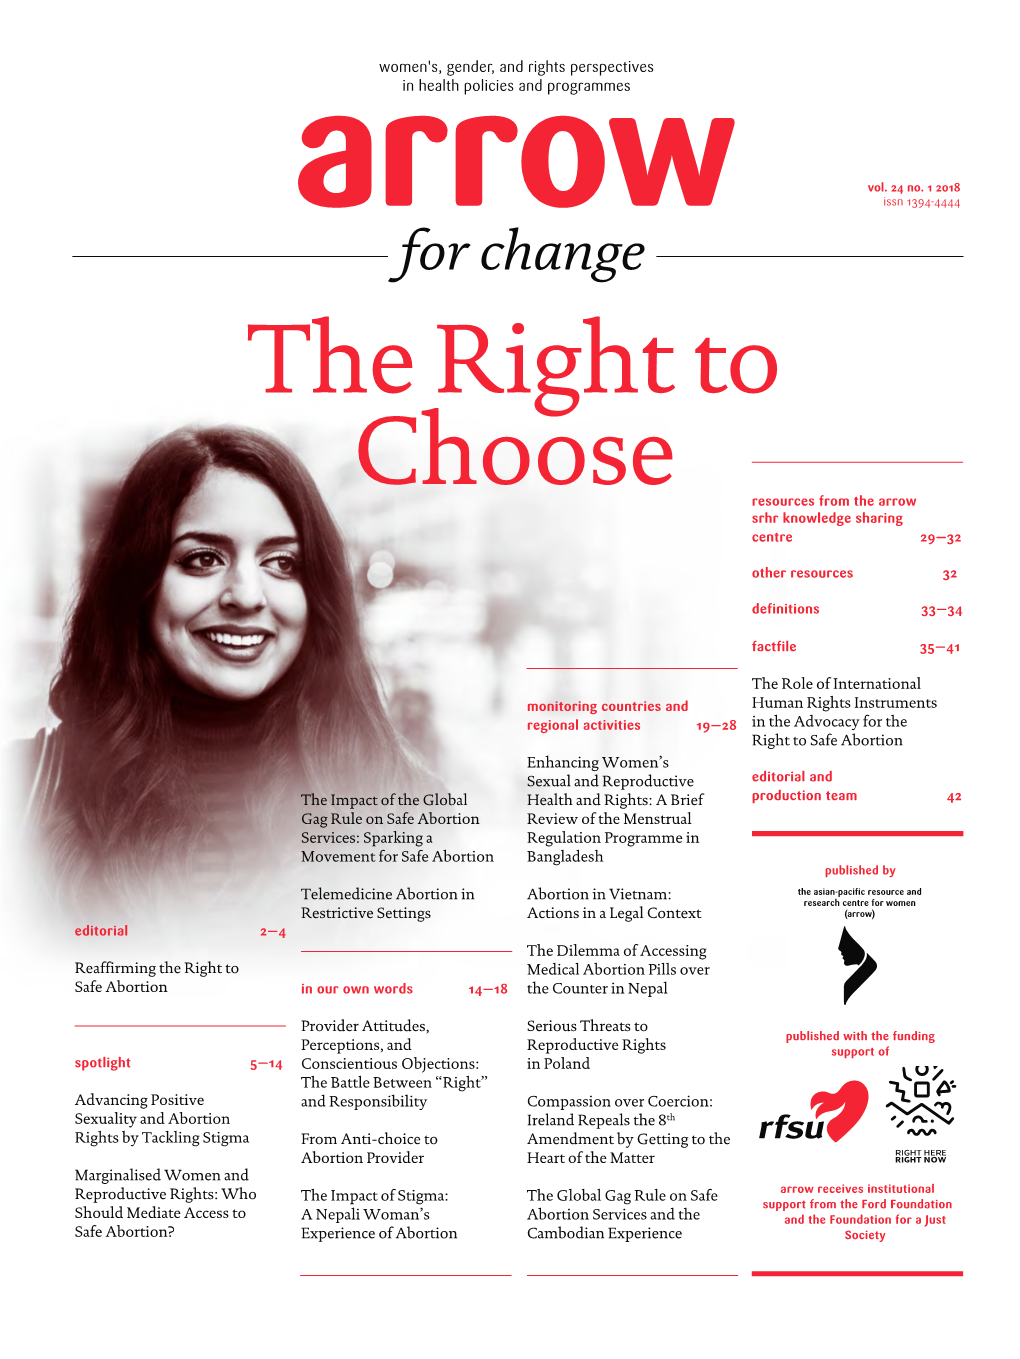 The Right to Choose Resources from the Arrow Srhr Knowledge Sharing Centre 29—32